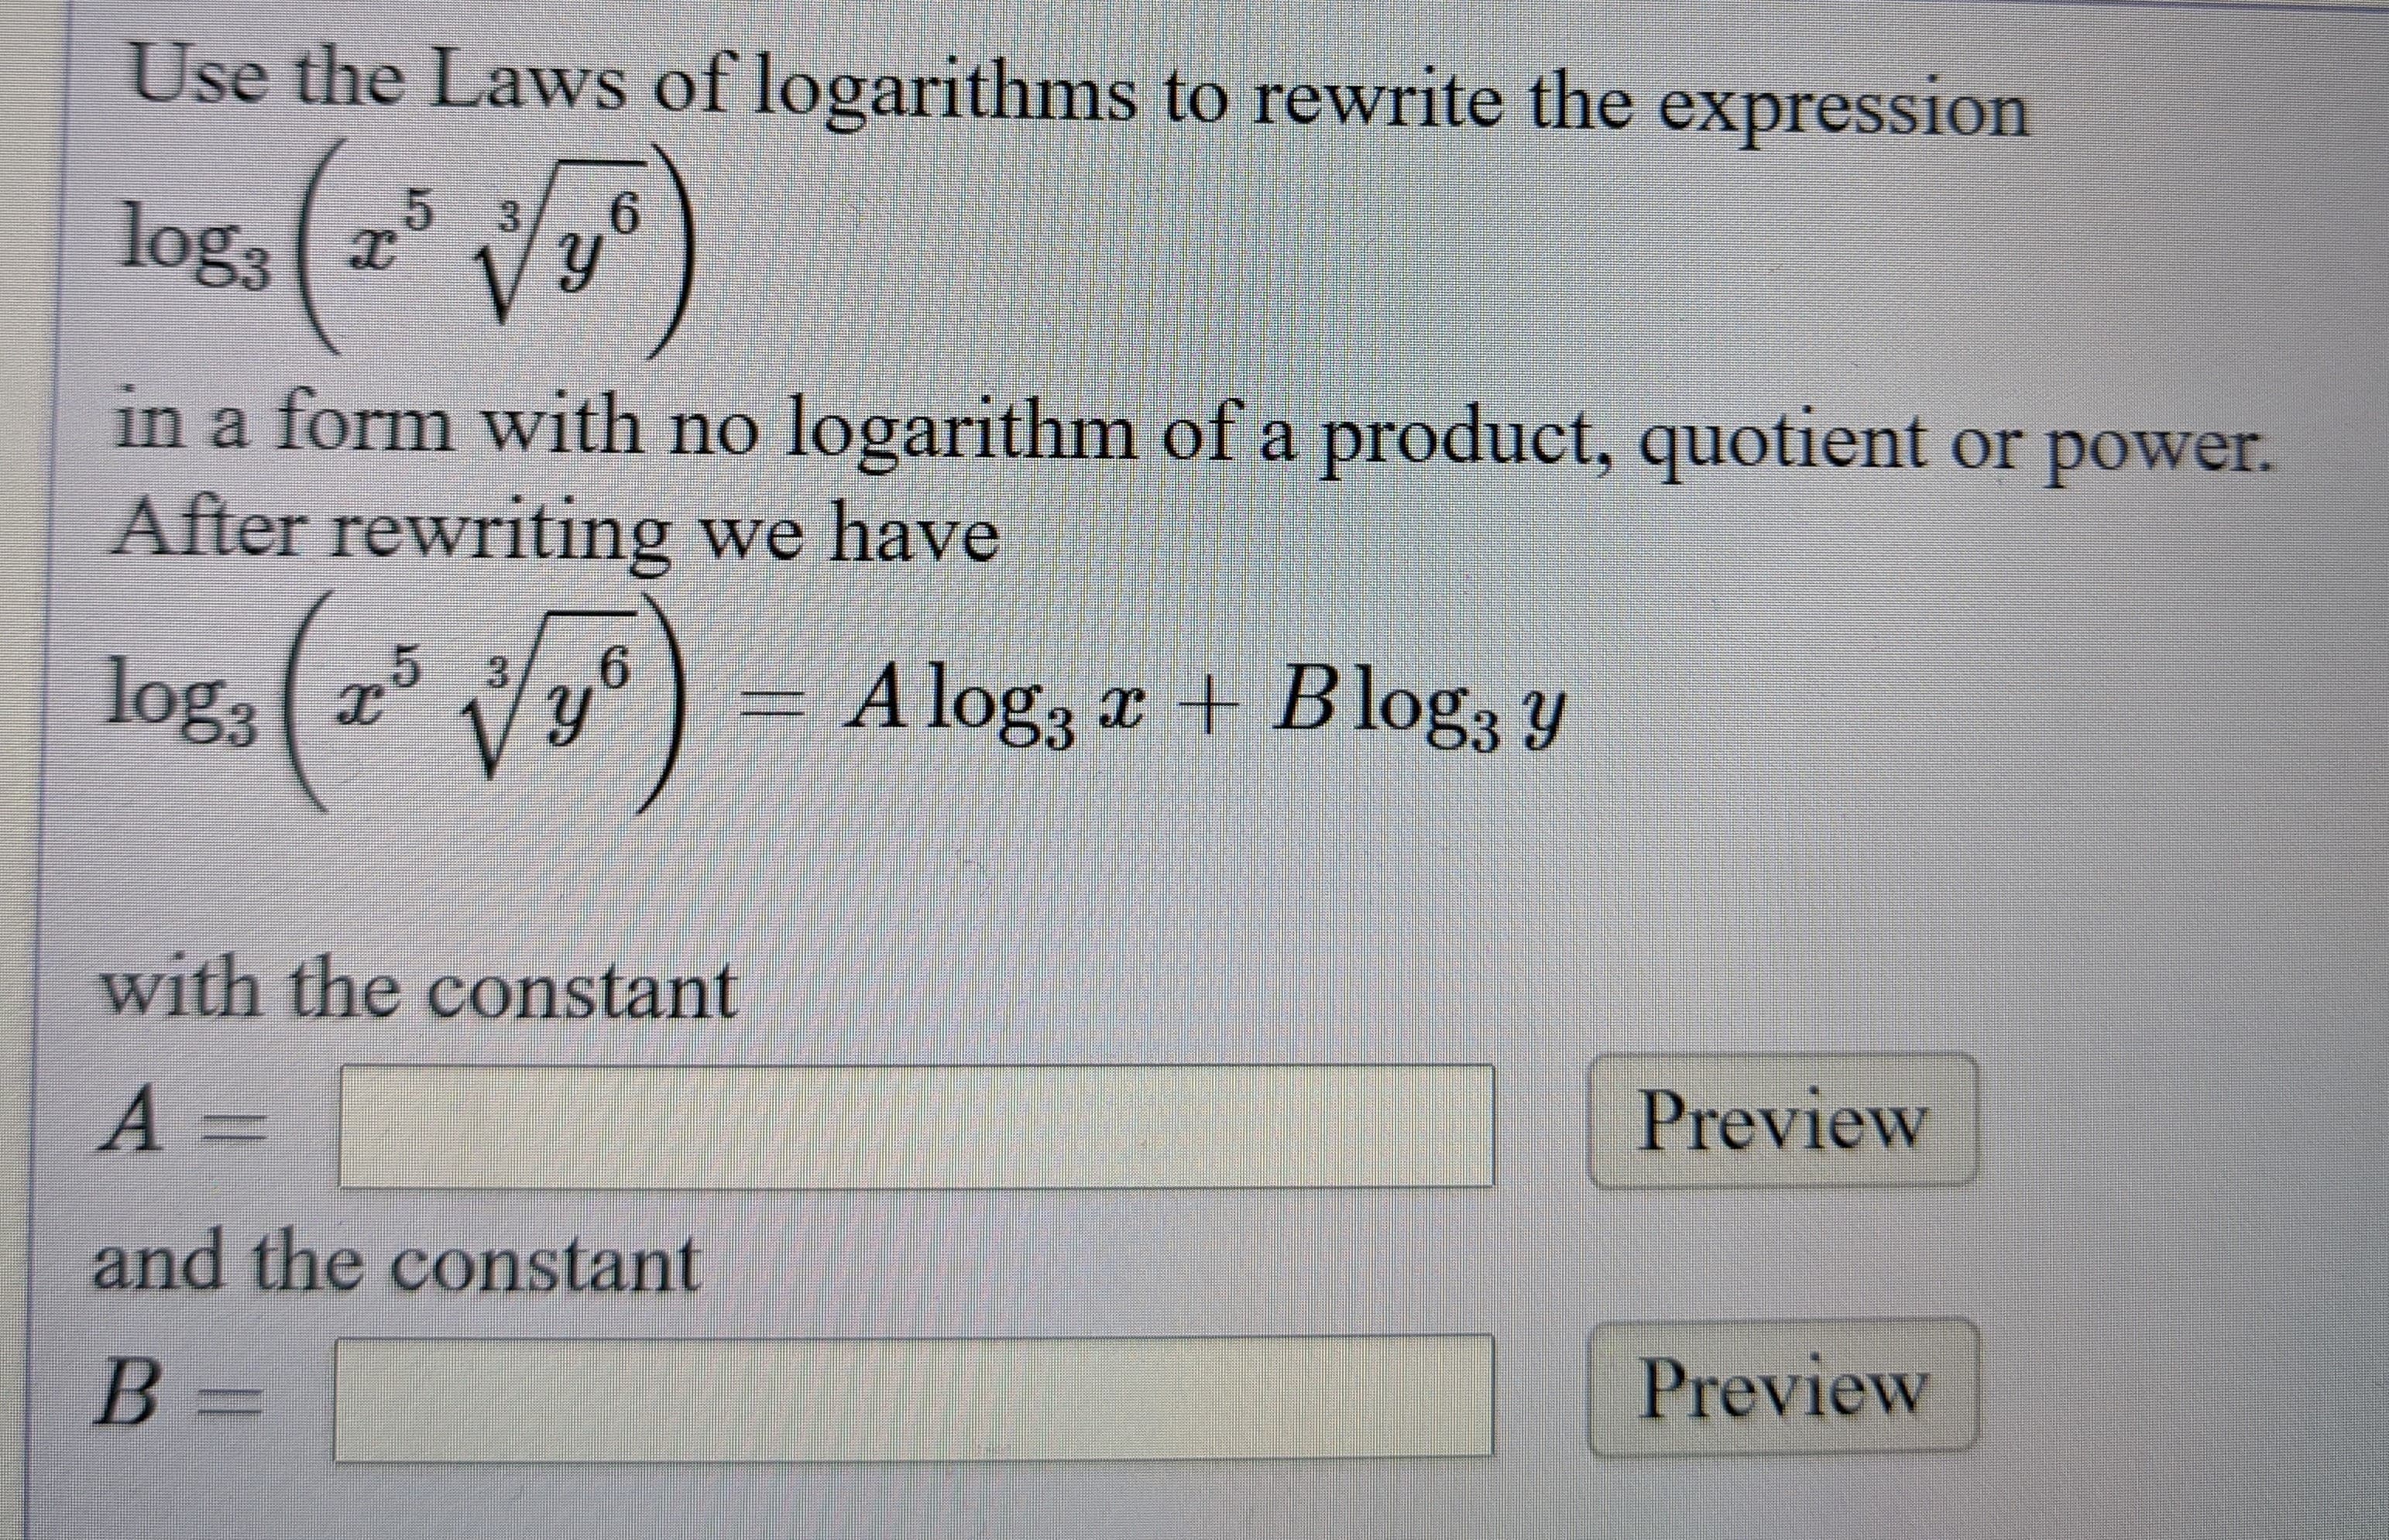 Use the Laws of logarithms to rewrite the expression
6.
log3
